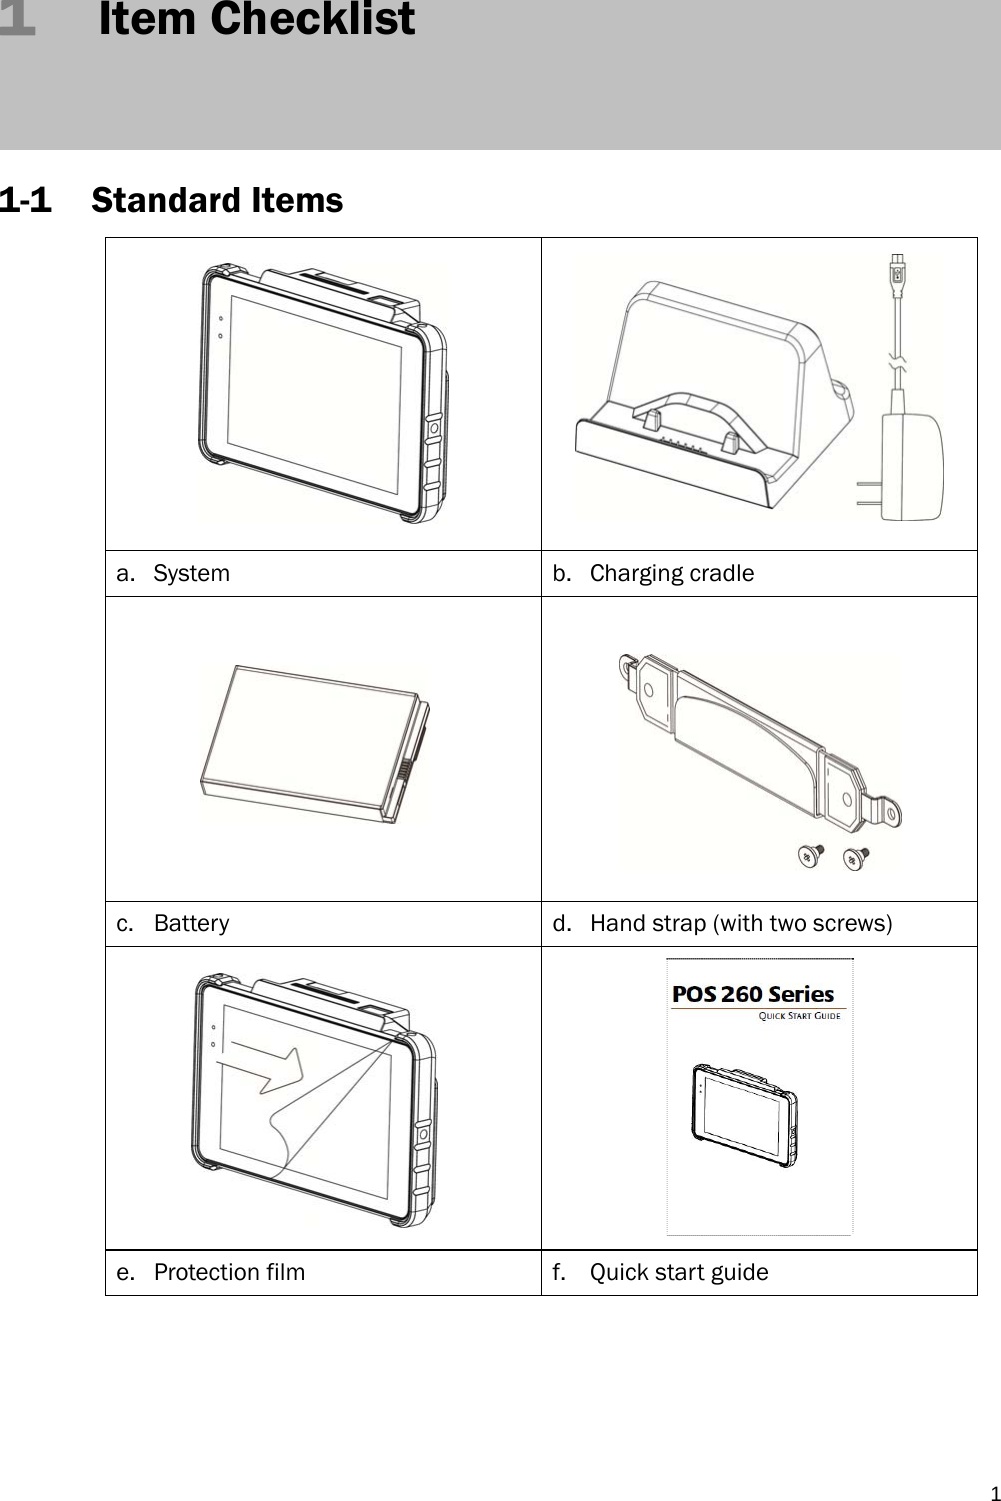   11   Item Checklist    1-1 Standard Items    a. System b. Charging cradle      c. Battery d. Hand strap (with two screws)   e. Protection film  f. Quick start guide      